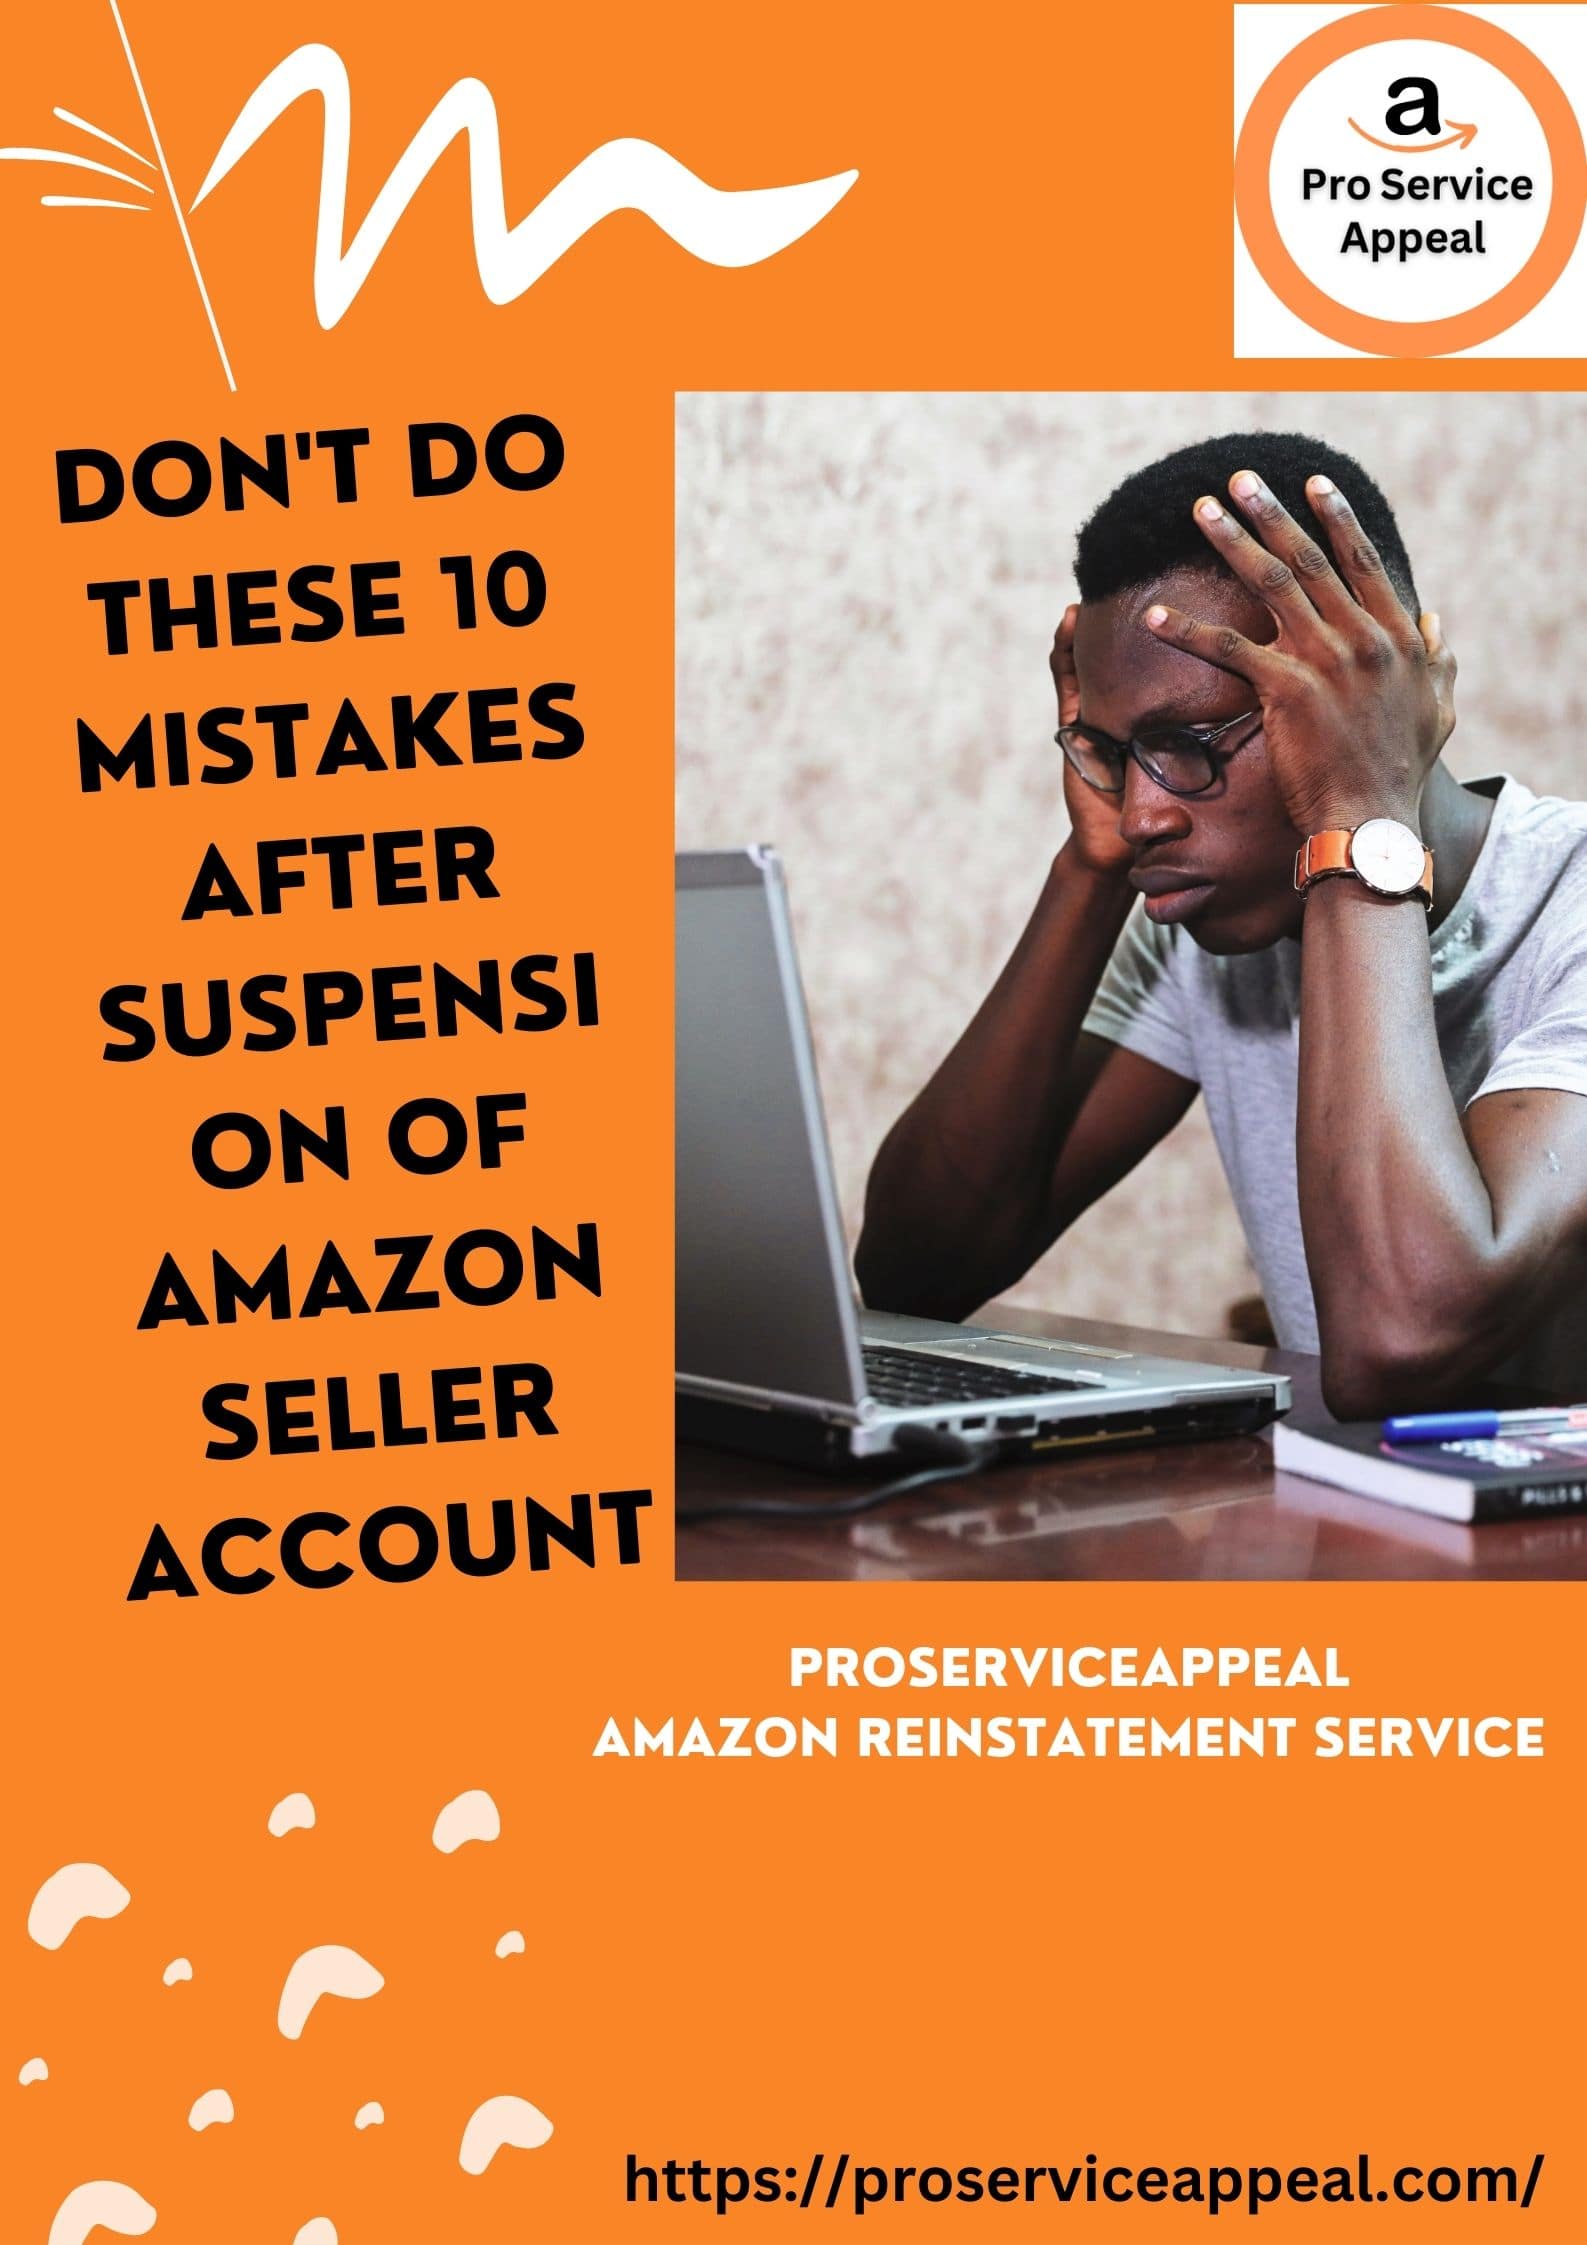 Don’t do these 10 mistakes after suspension of Amazon seller account